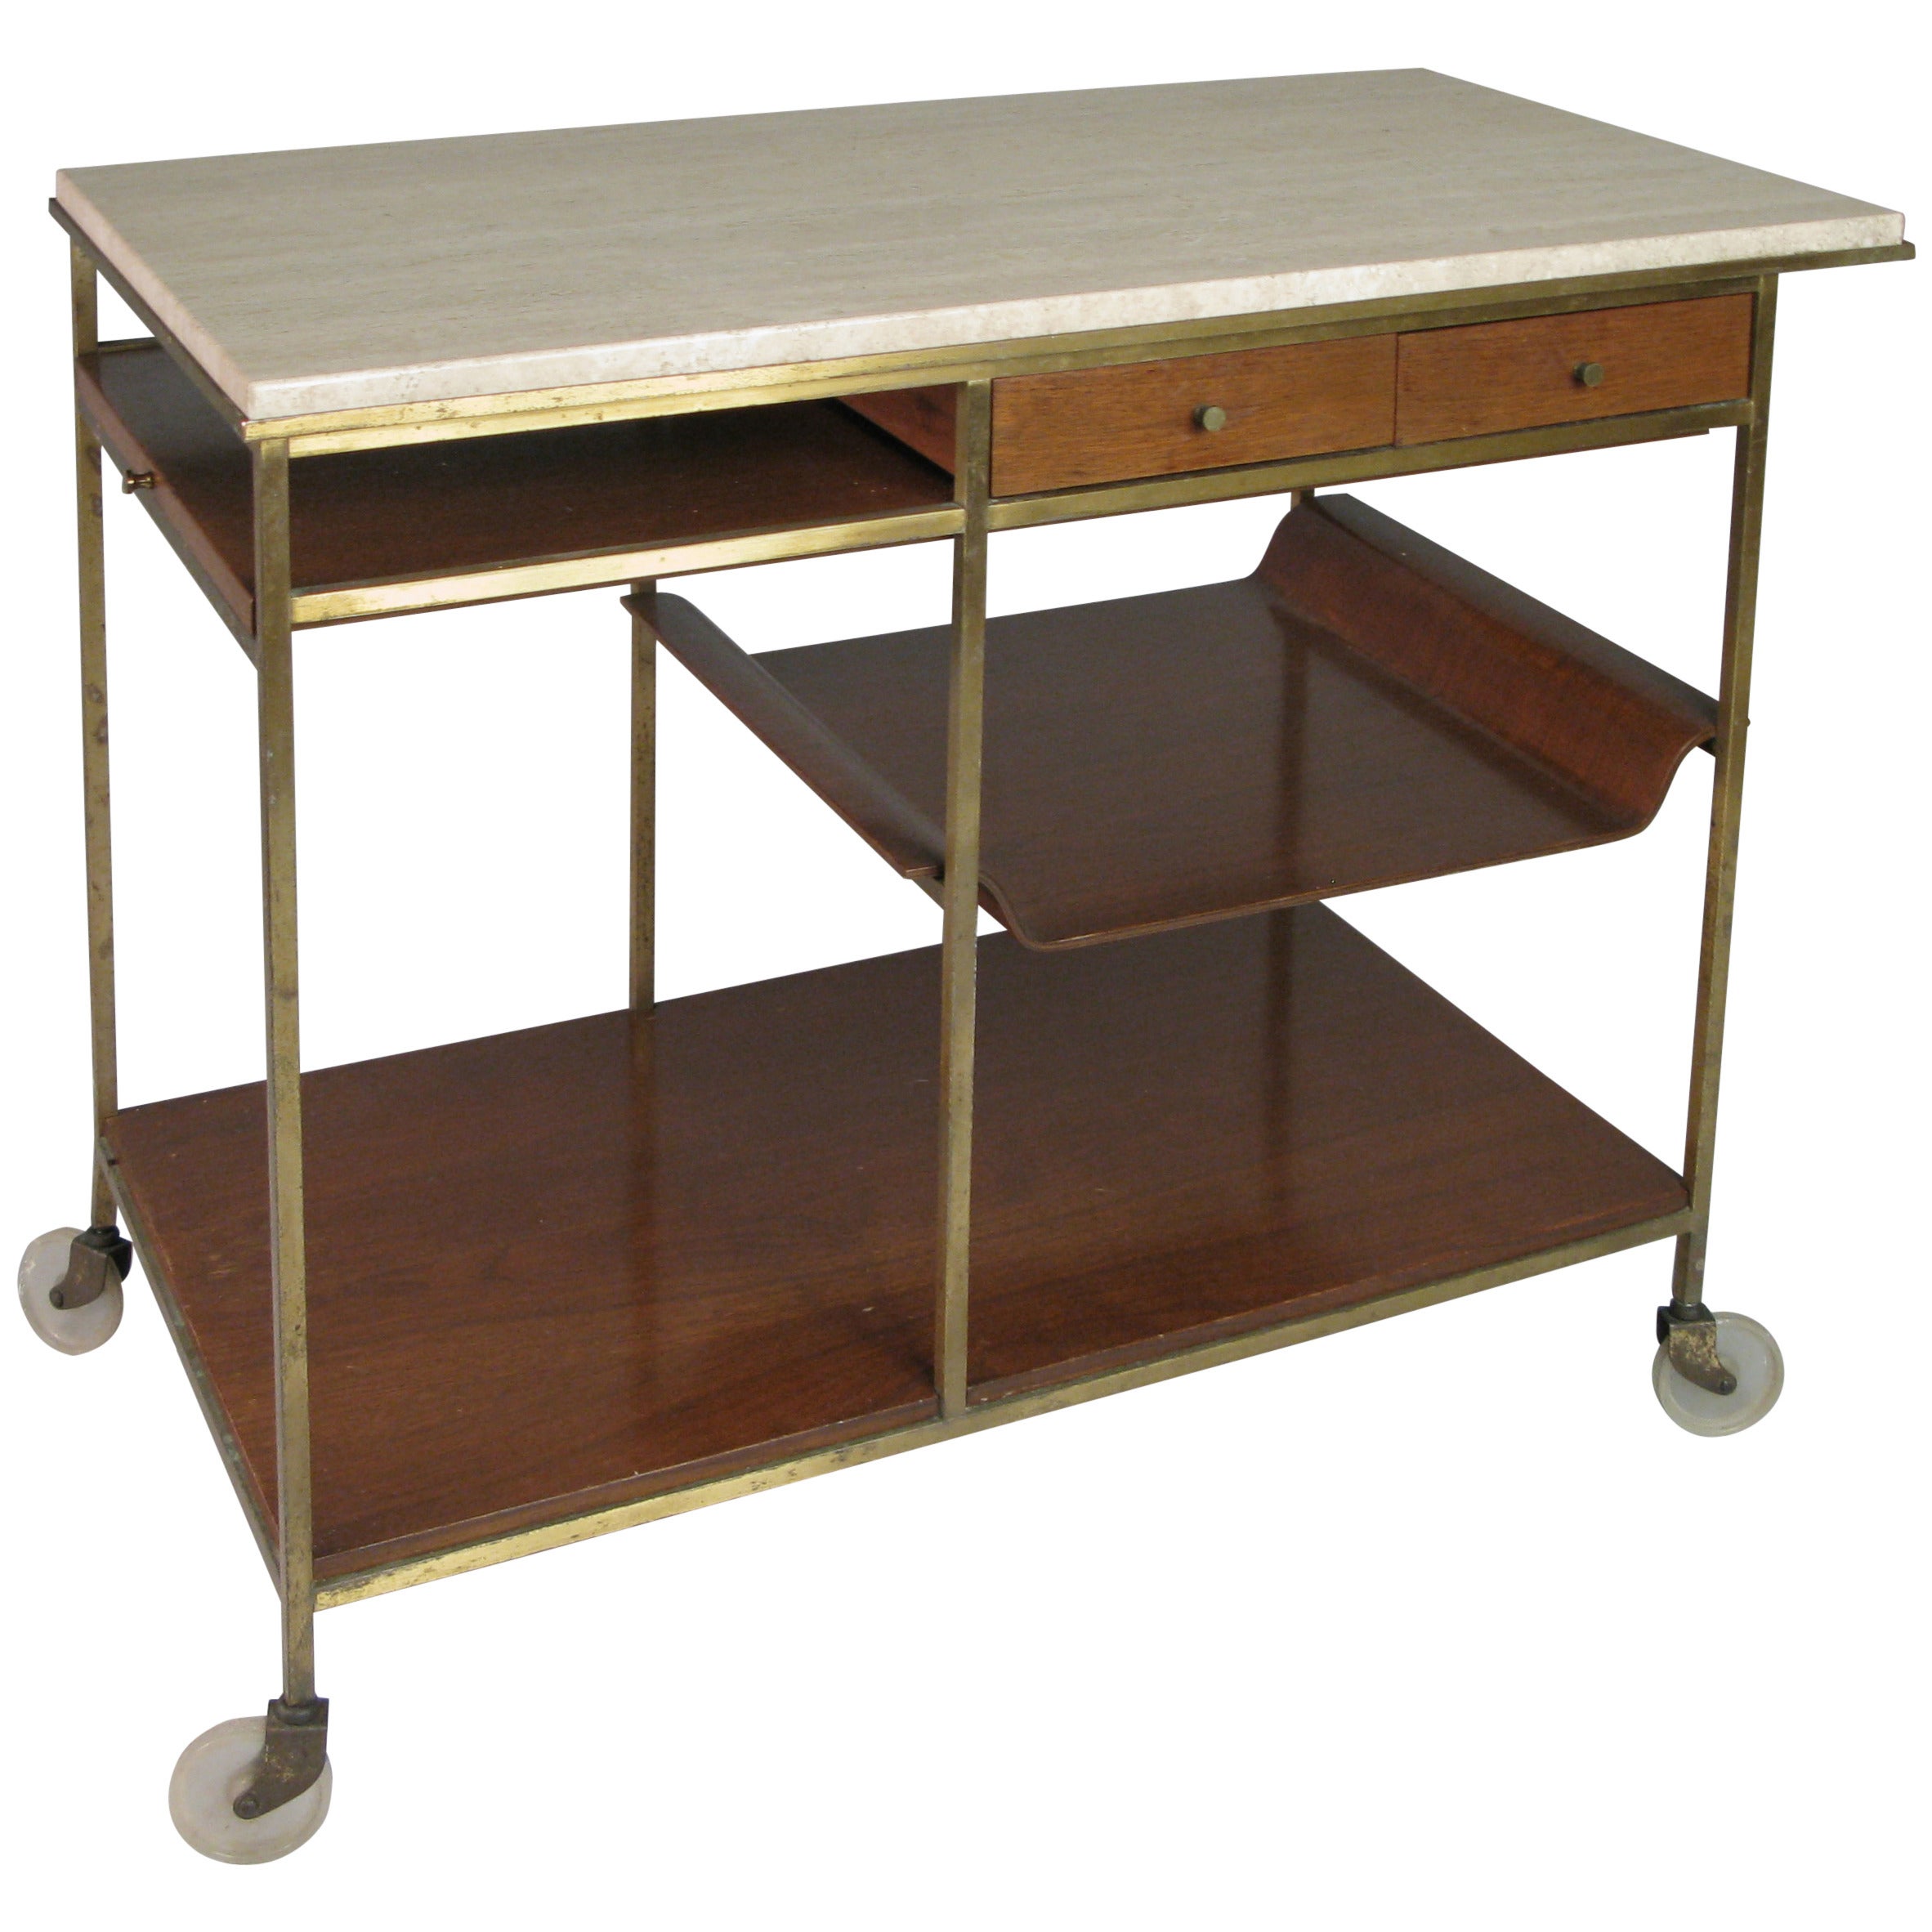 1950s Brass and Travertine Bar Cart by Paul McCobb for Calvin